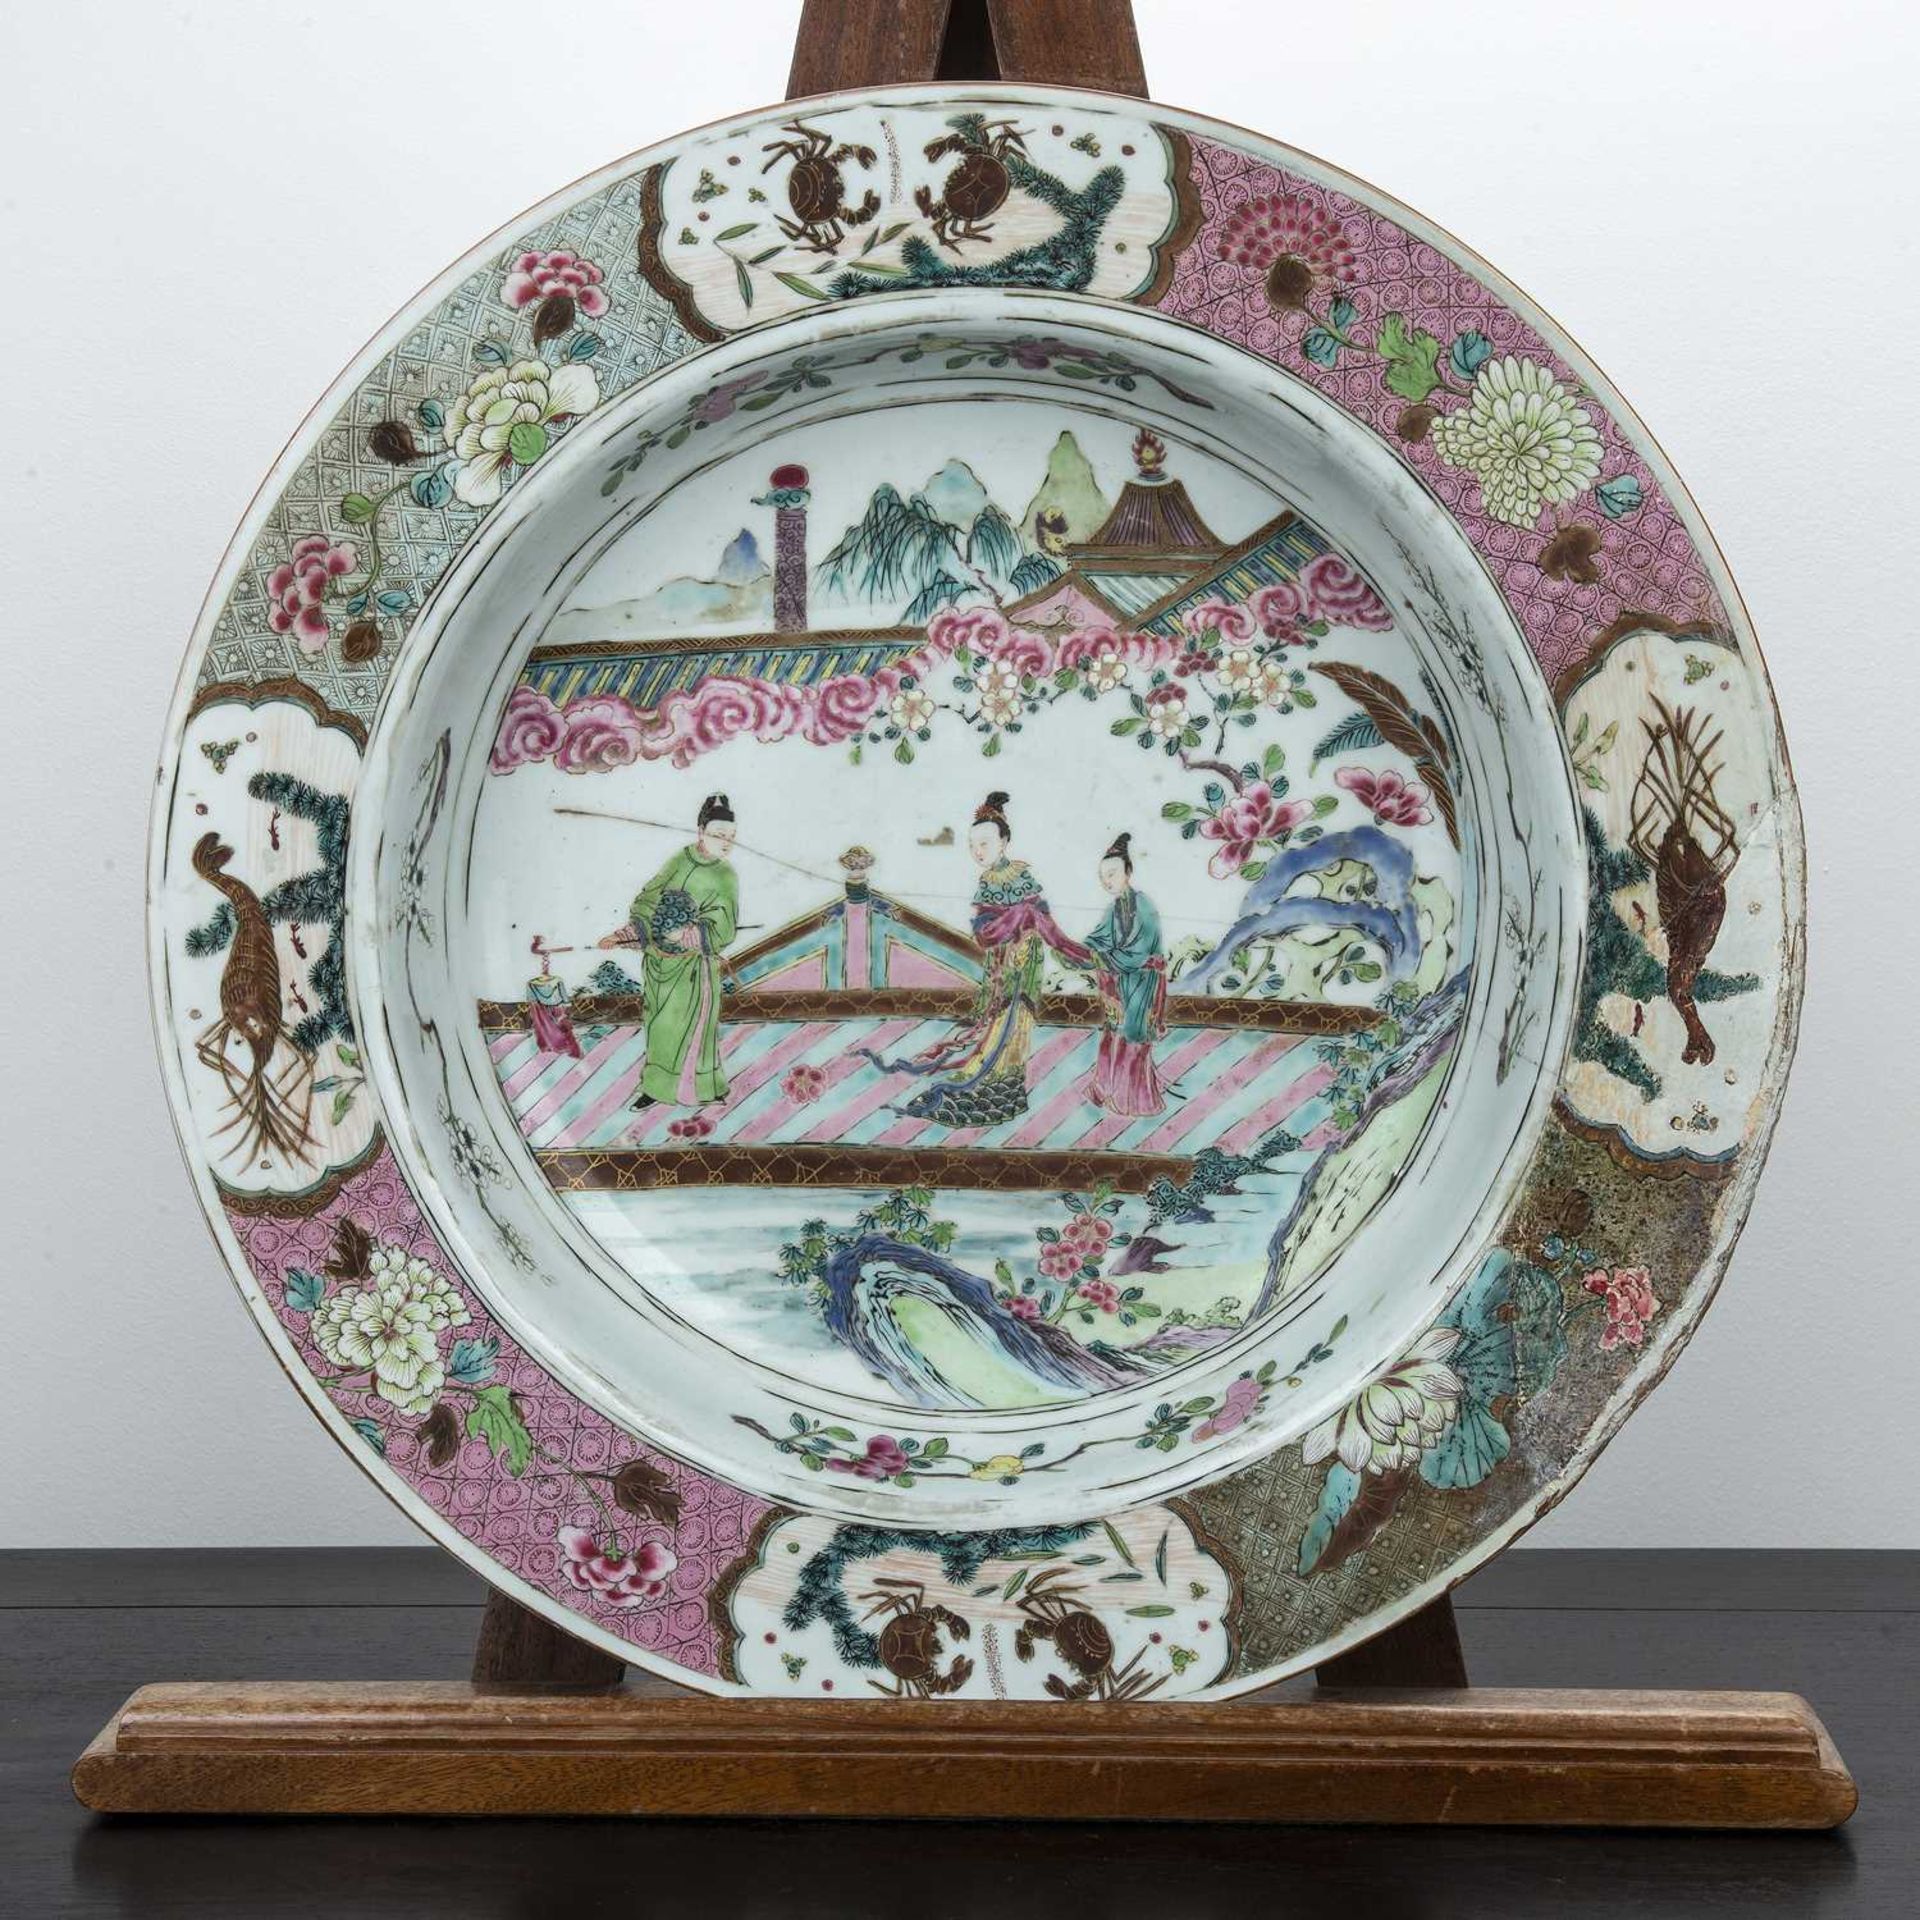 Large famille rose porcelain basin Chinese, 18th Century decorated to the centre depicting figures